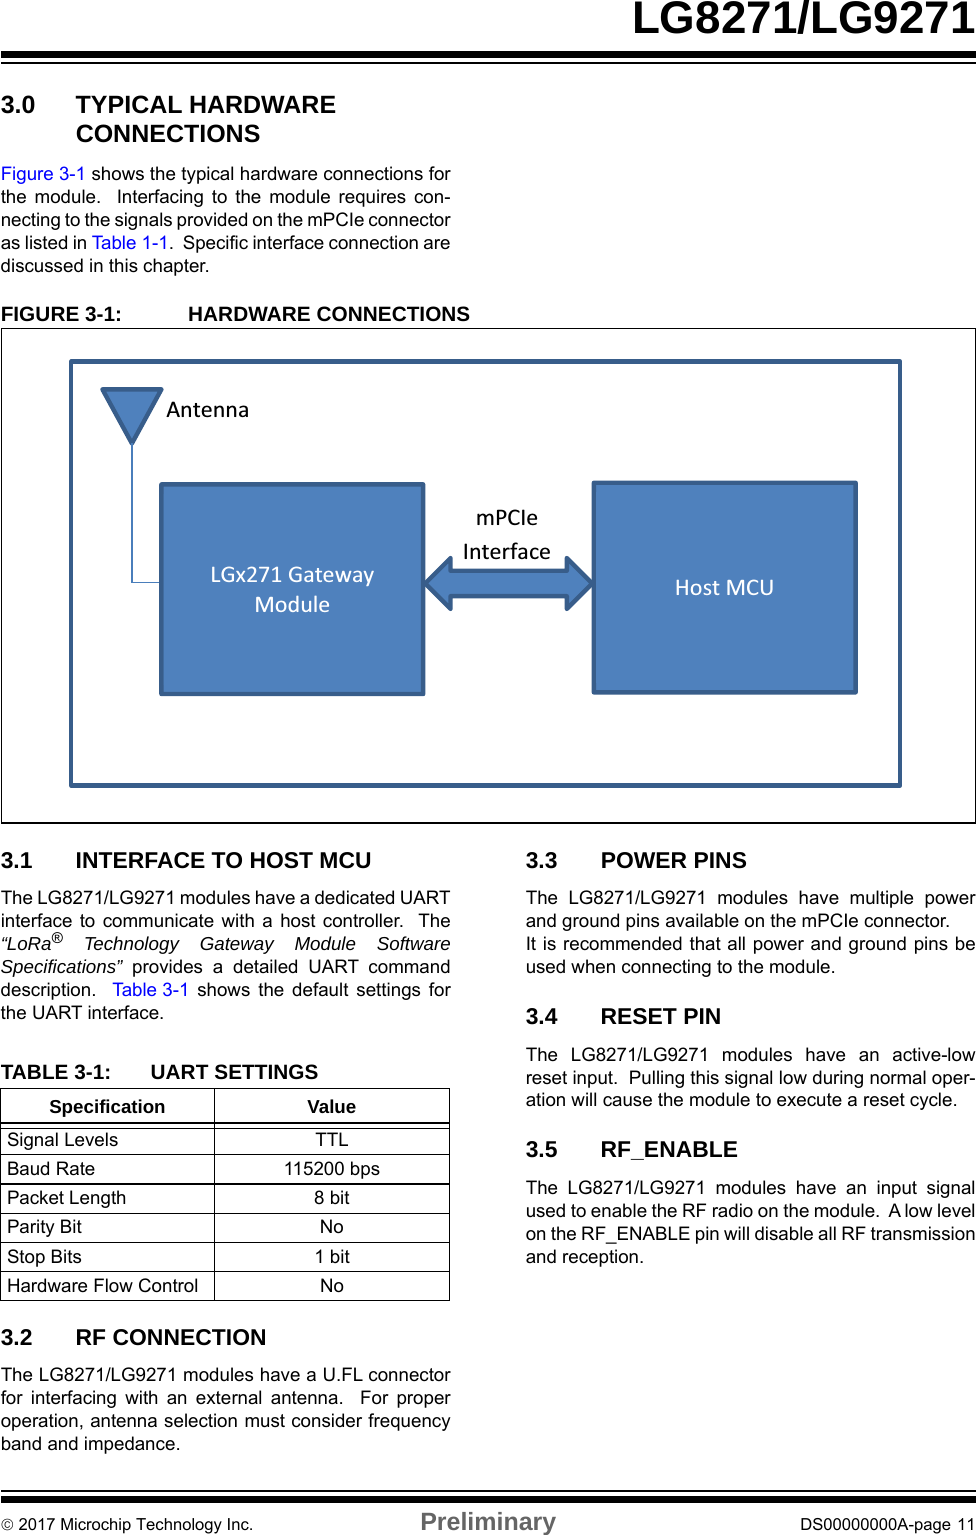  2017 Microchip Technology Inc. Preliminary DS00000000A-page 11LG8271/LG92713.0 TYPICAL HARDWARE CONNECTIONSFigure 3-1 shows the typical hardware connections forthe module.  Interfacing to the module requires con-necting to the signals provided on the mPCIe connectoras listed in Table 1- 1 .  Specific interface connection arediscussed in this chapter.FIGURE 3-1: HARDWARE CONNECTIONS3.1 INTERFACE TO HOST MCUThe LG8271/LG9271 modules have a dedicated UARTinterface to communicate with a host controller.  The“LoRa® Technology Gateway Module SoftwareSpecifications”  provides a detailed UART commanddescription.  Table 3-1 shows the default settings forthe UART interface.3.2 RF CONNECTIONThe LG8271/LG9271 modules have a U.FL connectorfor interfacing with an external antenna.  For properoperation, antenna selection must consider frequencyband and impedance.3.3 POWER PINSThe LG8271/LG9271 modules have multiple powerand ground pins available on the mPCIe connector.  It is recommended that all power and ground pins beused when connecting to the module.3.4 RESET PINThe LG8271/LG9271 modules have an active-lowreset input.  Pulling this signal low during normal oper-ation will cause the module to execute a reset cycle. 3.5 RF_ENABLEThe LG8271/LG9271 modules have an input signalused to enable the RF radio on the module.  A low levelon the RF_ENABLE pin will disable all RF transmissionand reception.Antenna mPCIe Interface LGx271 Gateway Module Host MCUTABLE 3-1: UART SETTINGSSpecification ValueSignal Levels TTLBaud Rate 115200 bpsPacket Length 8 bitParity Bit NoStop Bits 1 bitHardware Flow Control No